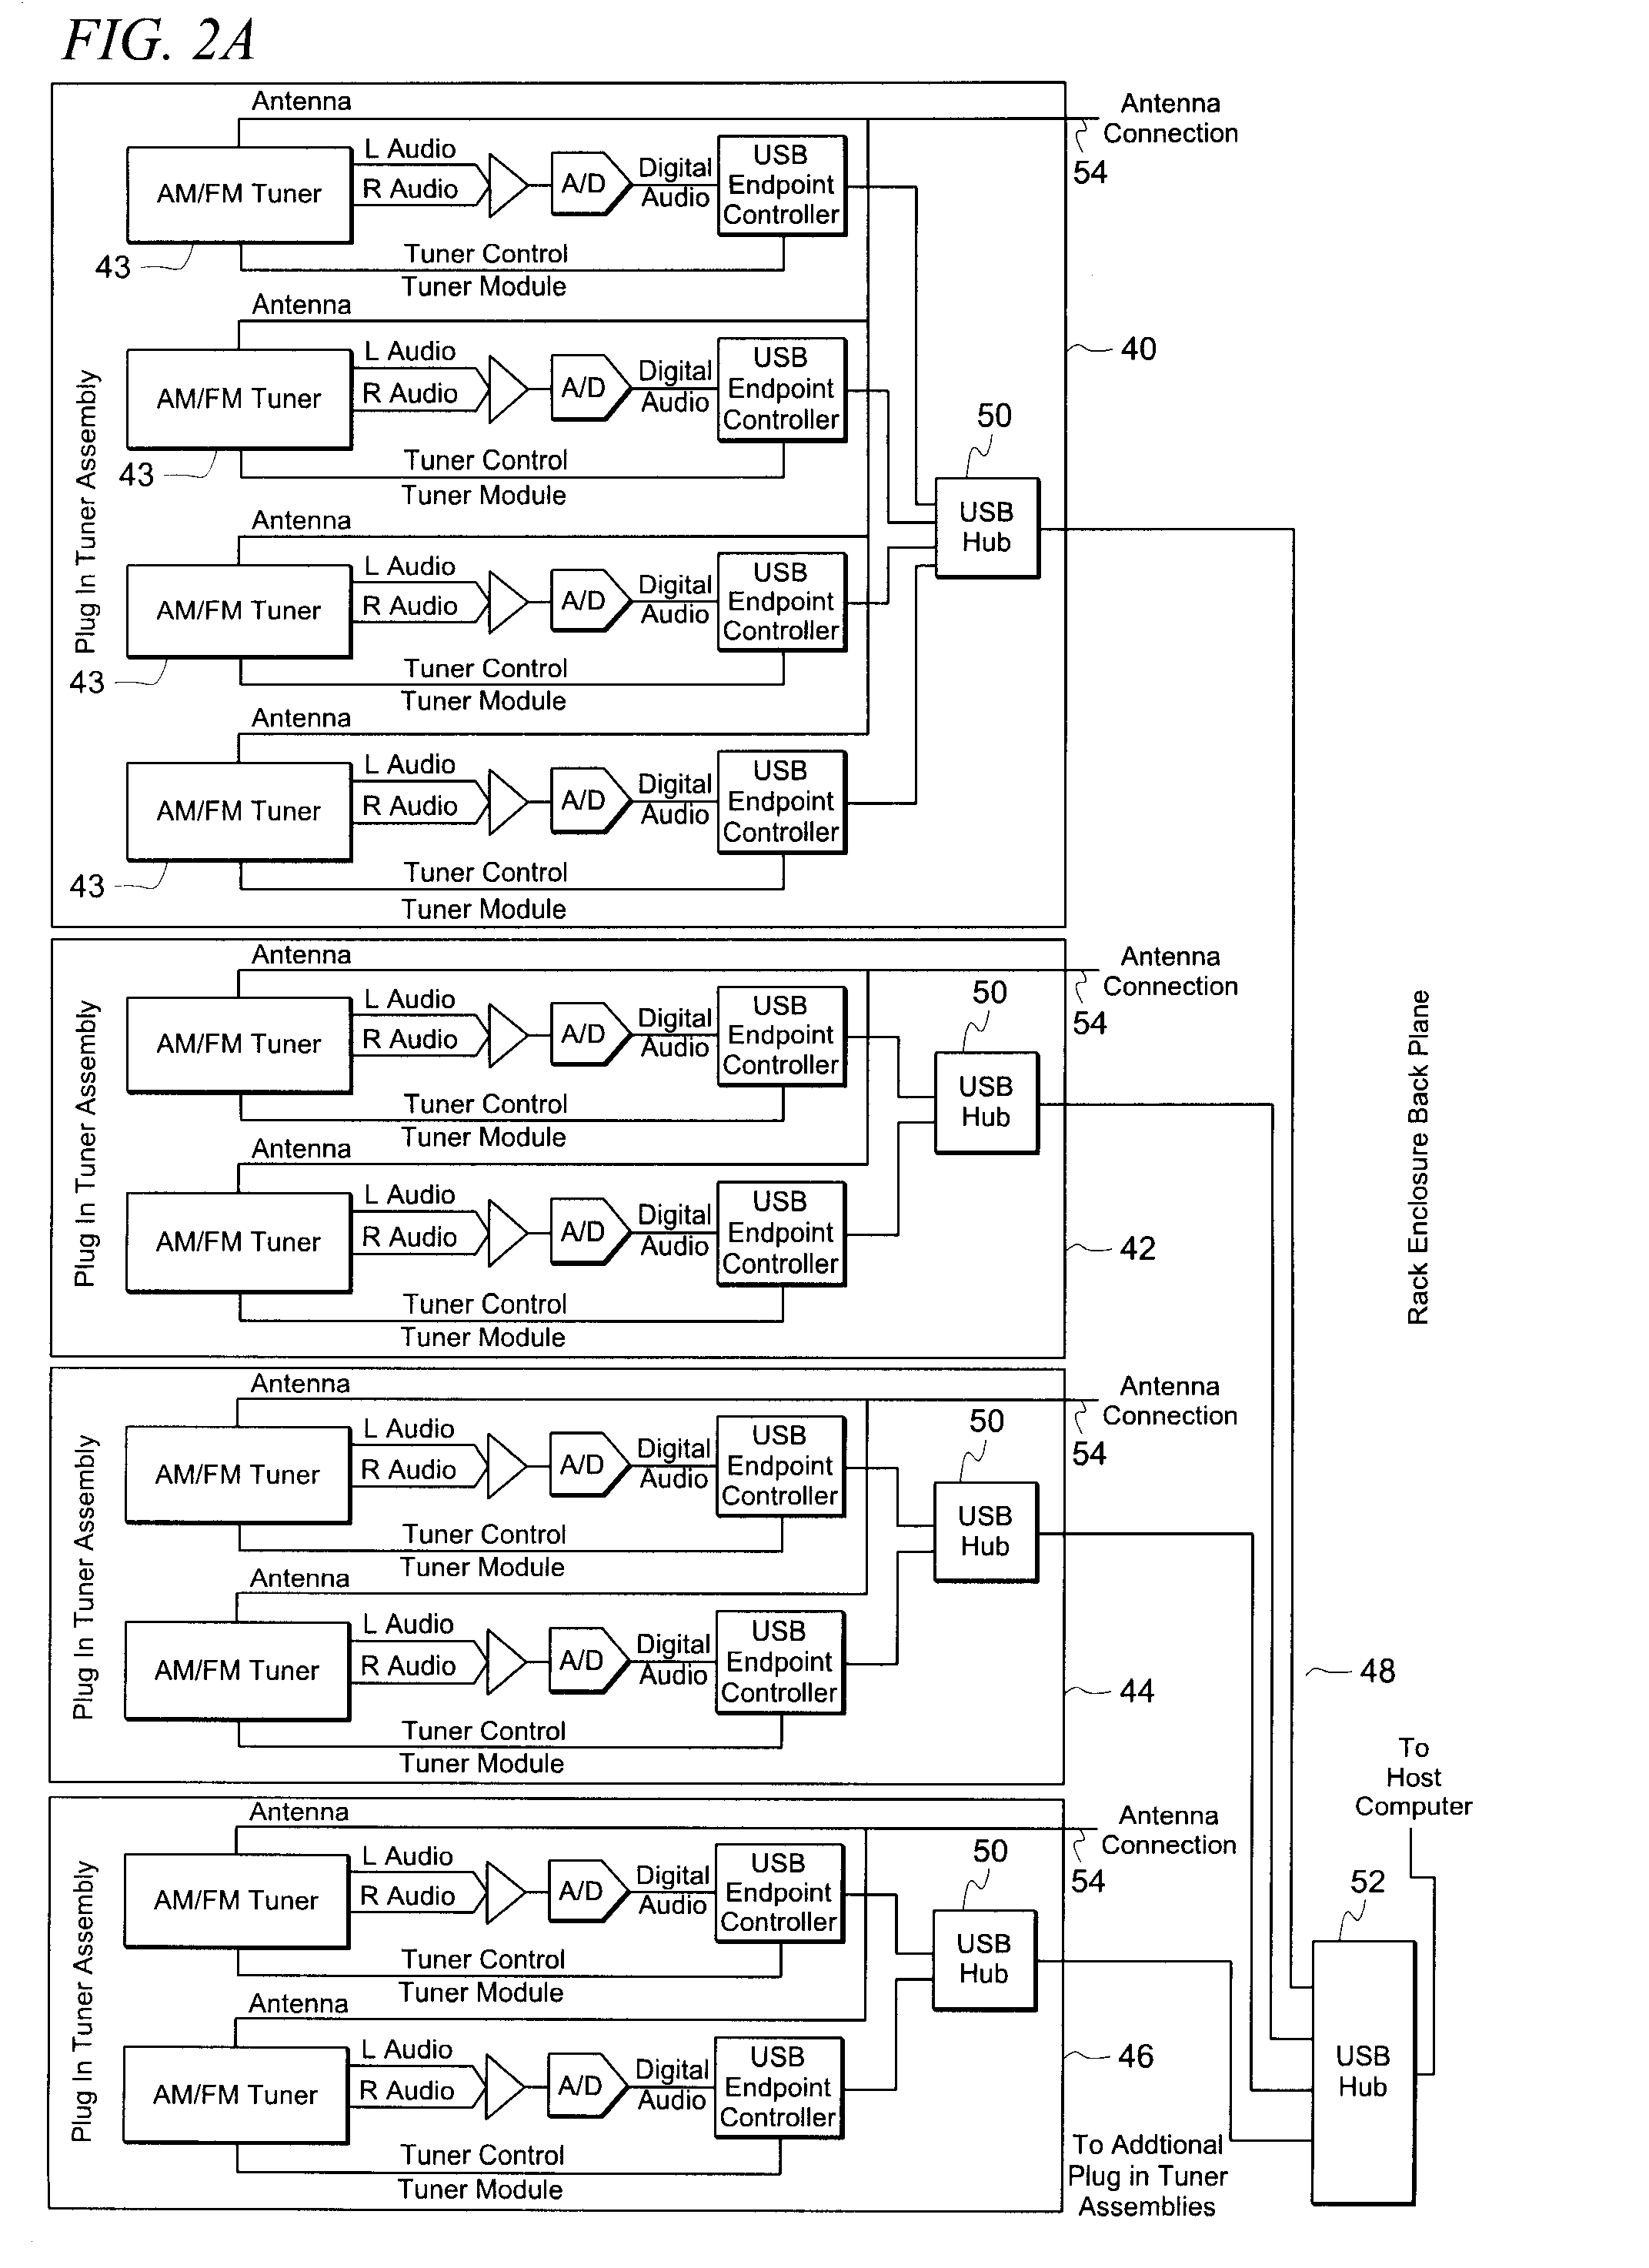 Device for monitoring multiple broadcast signals